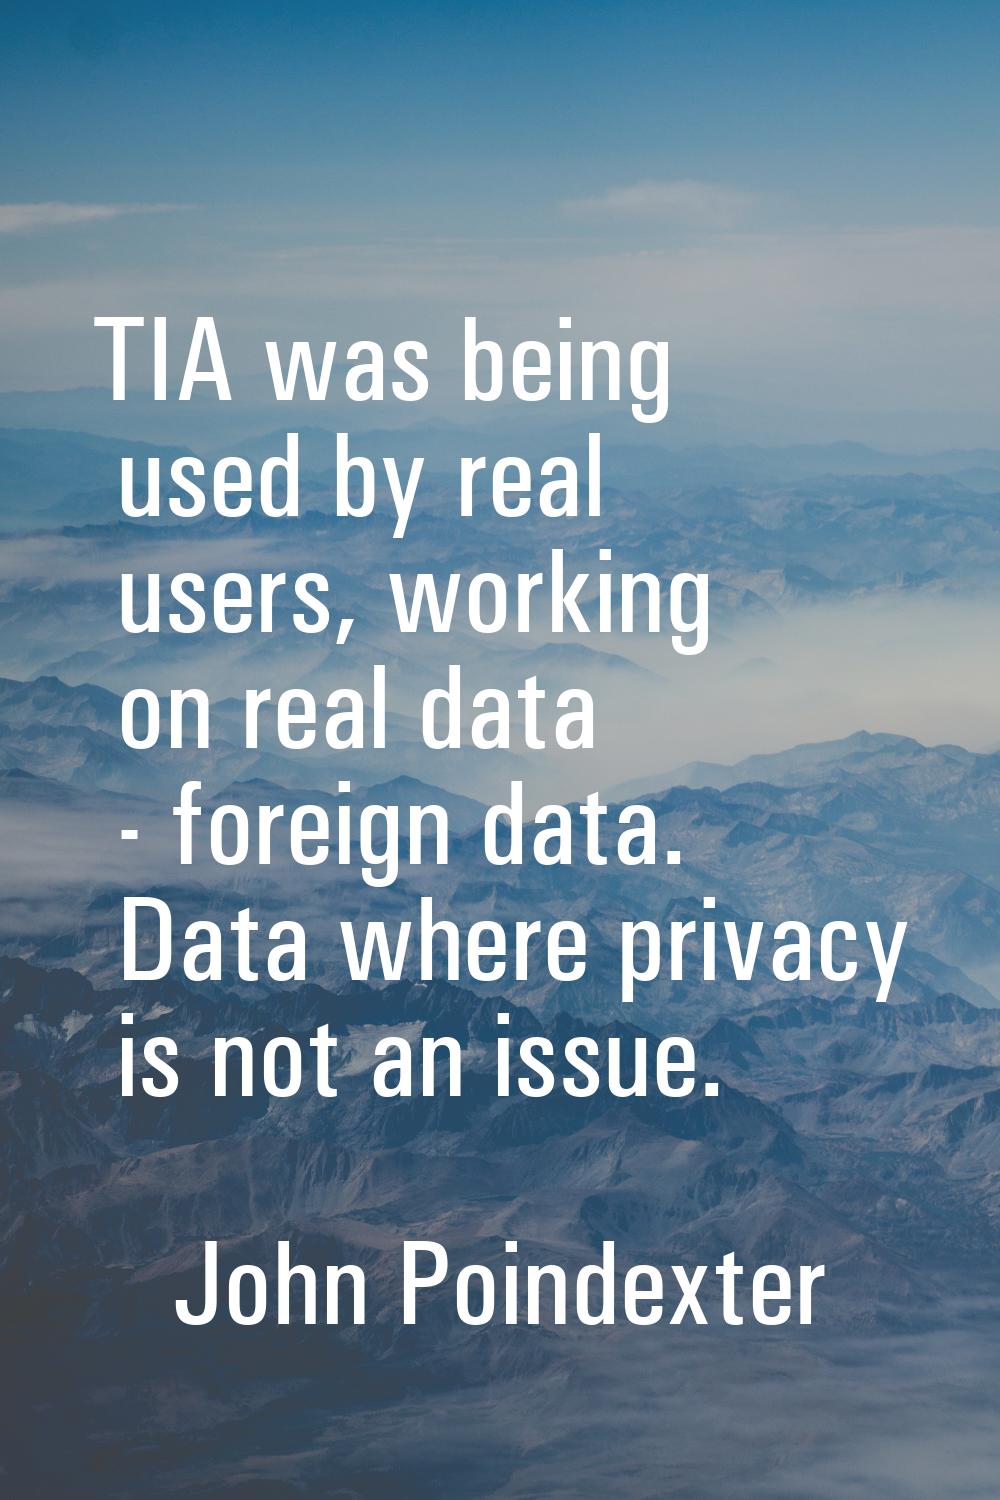 TIA was being used by real users, working on real data - foreign data. Data where privacy is not an